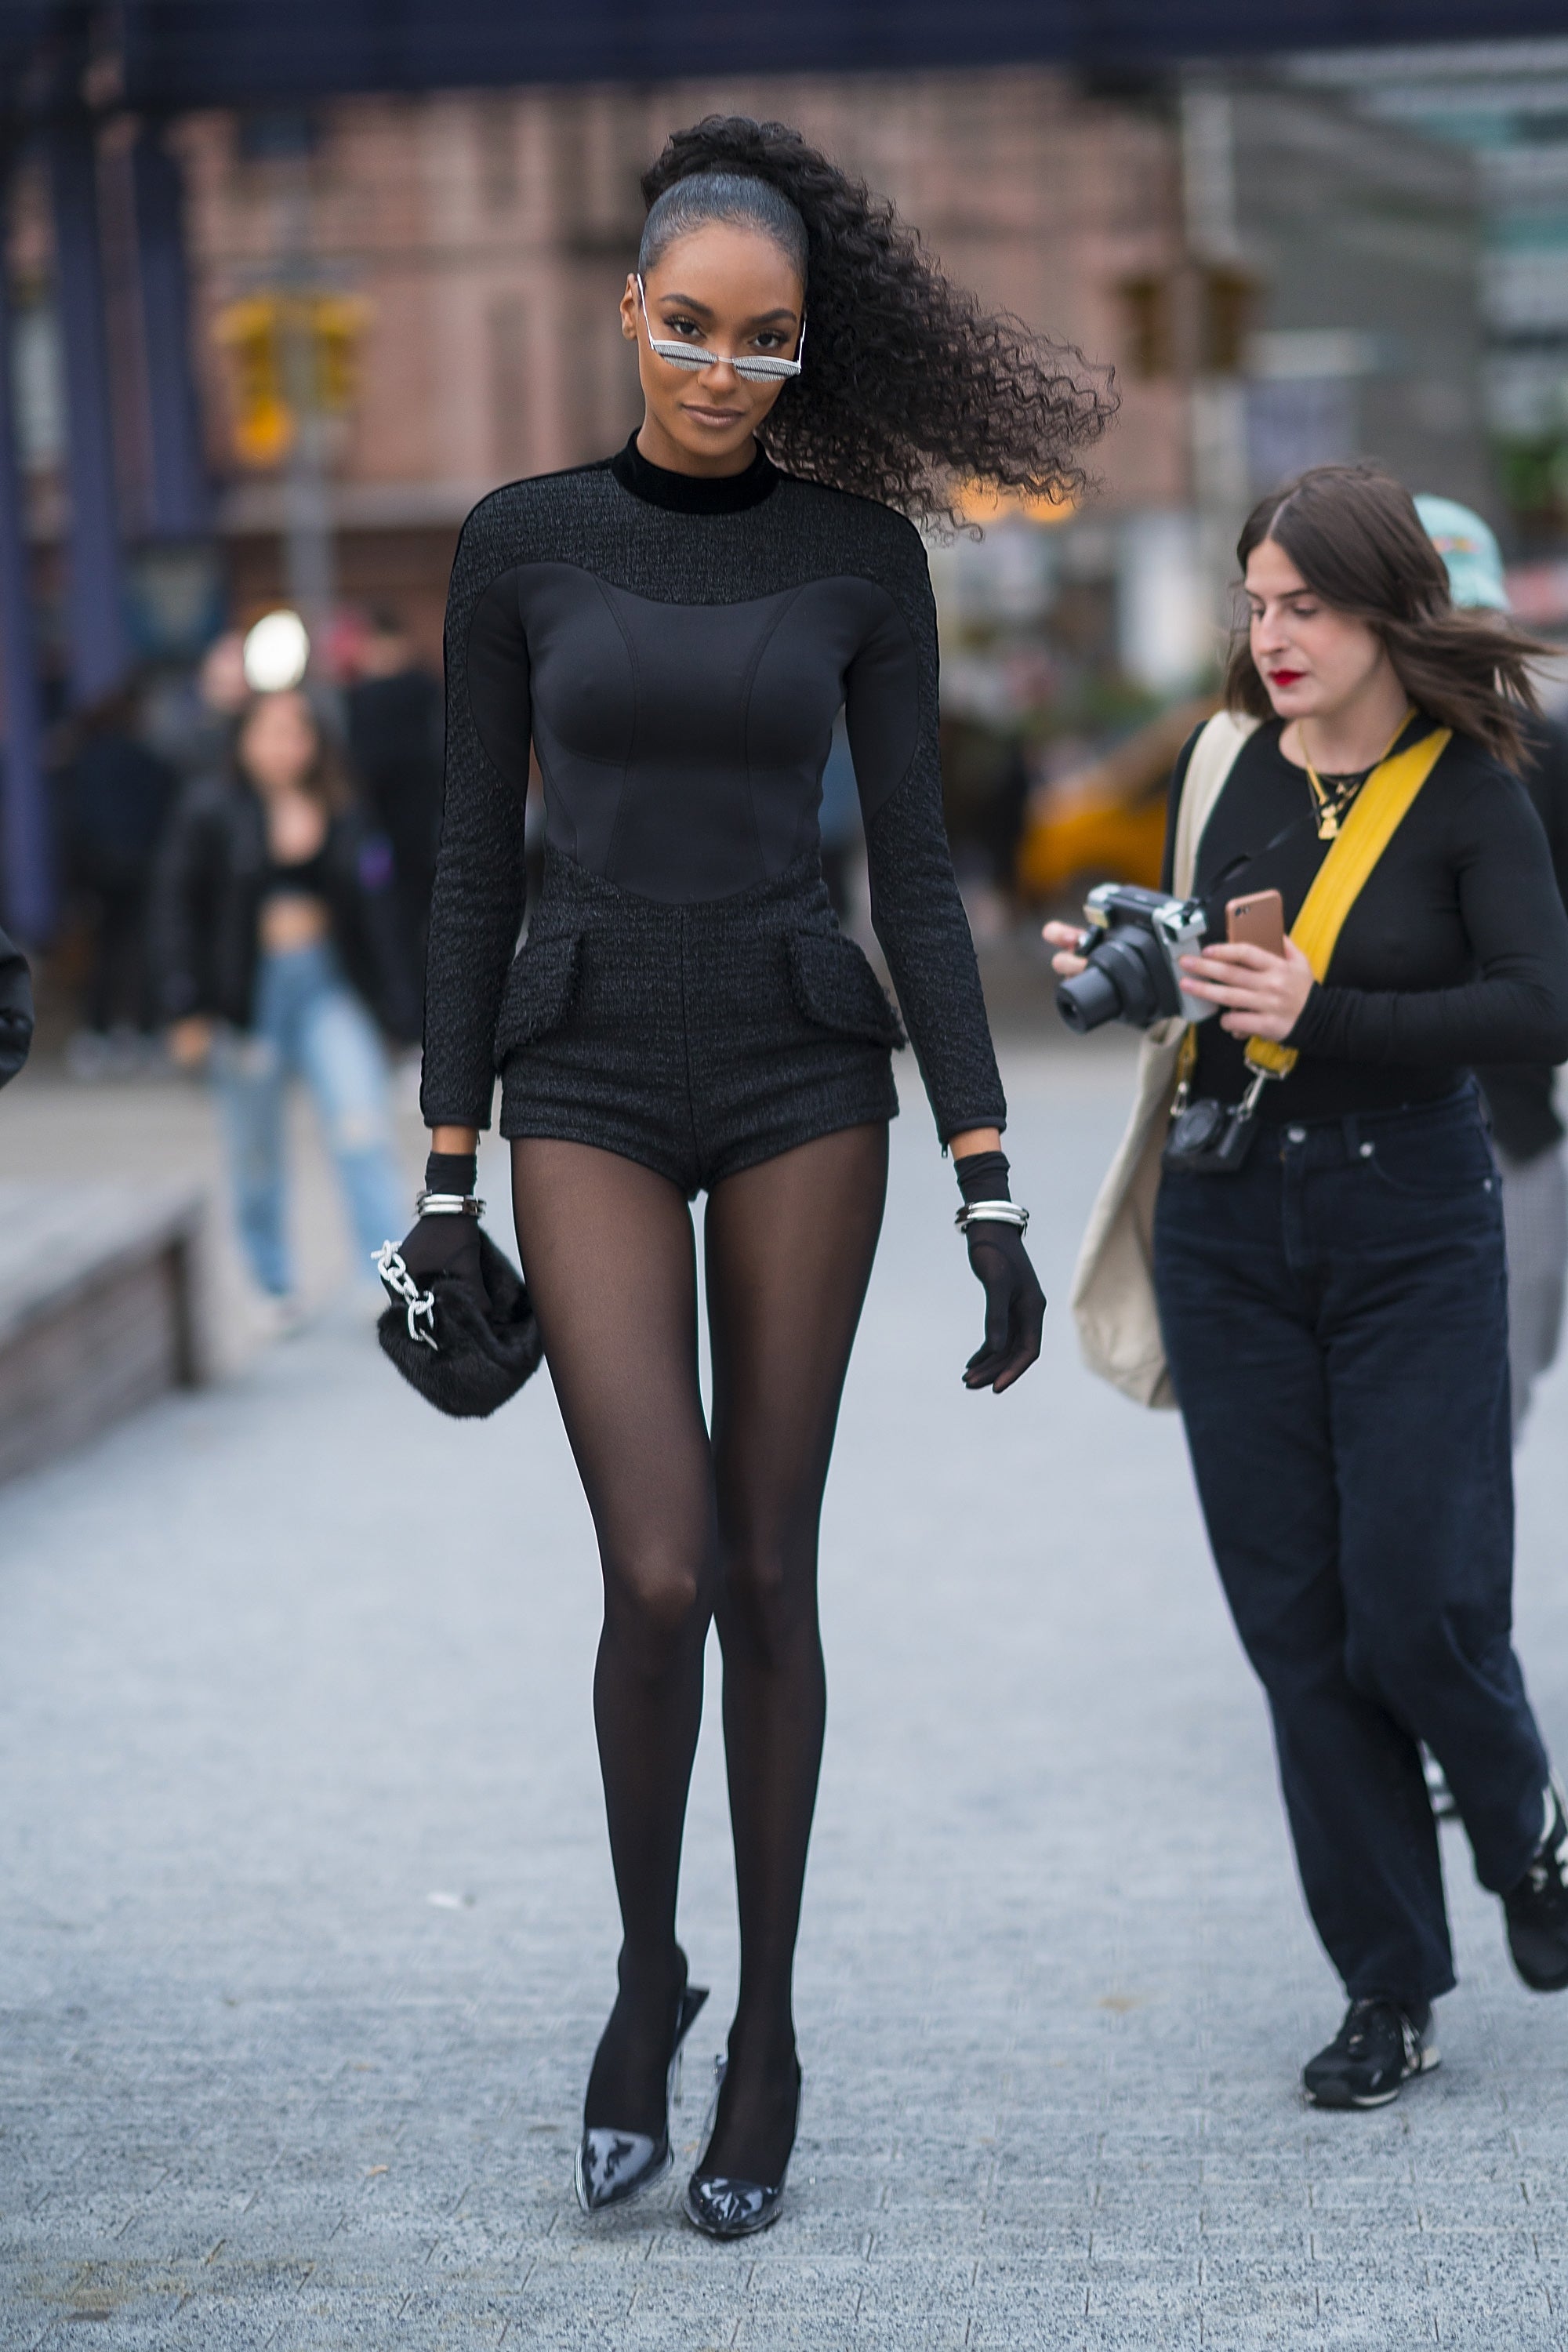 Style Starters: An Ode To The Black Girl 'Model Walk'